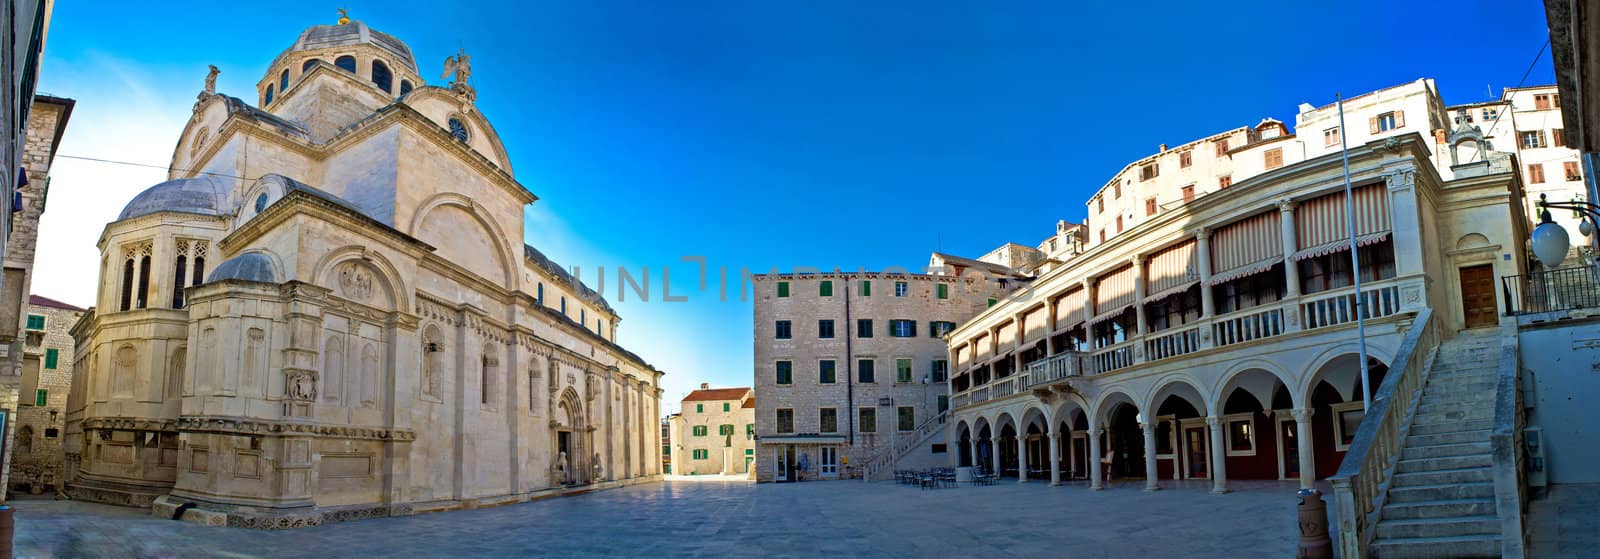 Sibenik UNESCO cathedral square panorama by xbrchx